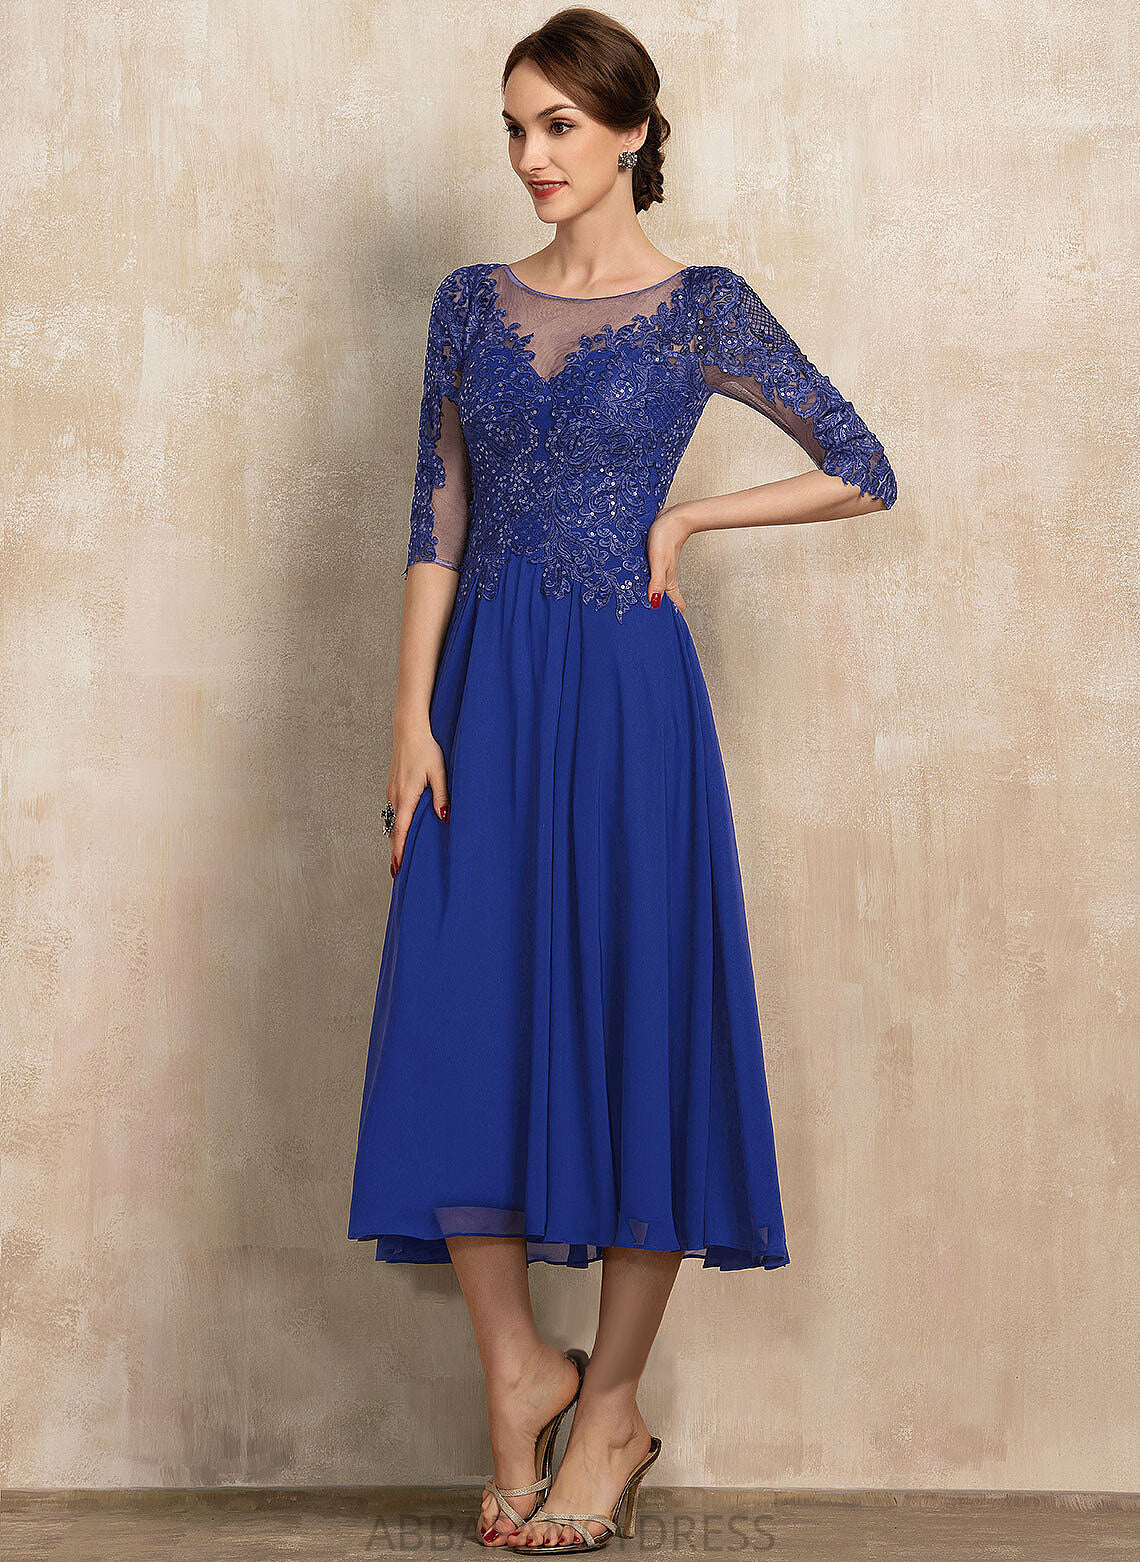 Scoop Sequins Dress Bride Mother Lace the Tea-Length Chiffon of Mira Neck A-Line With Mother of the Bride Dresses